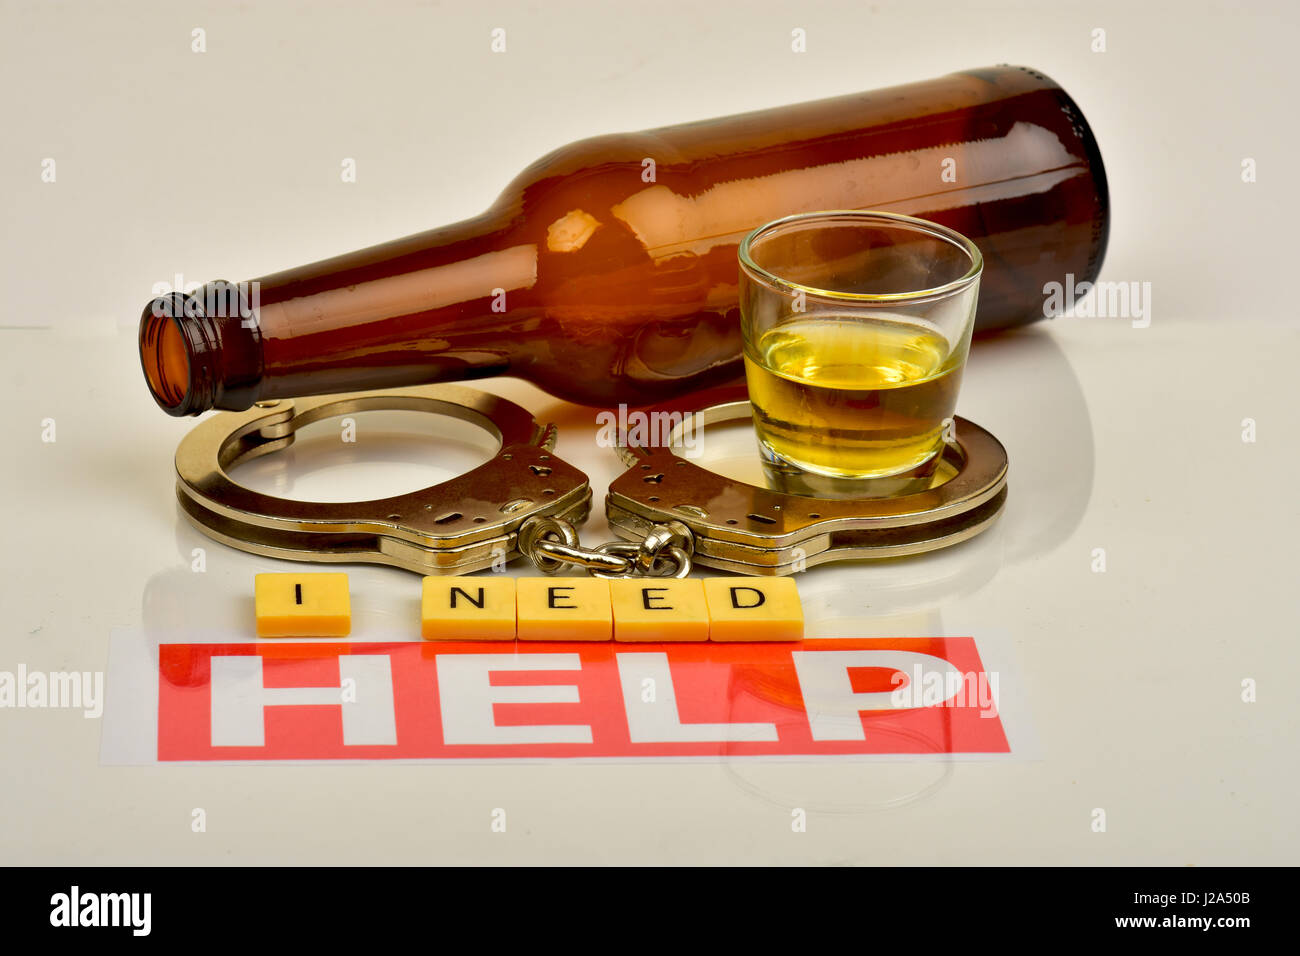 Signs and symbols of alcoholism and the need for help. Stock Photo